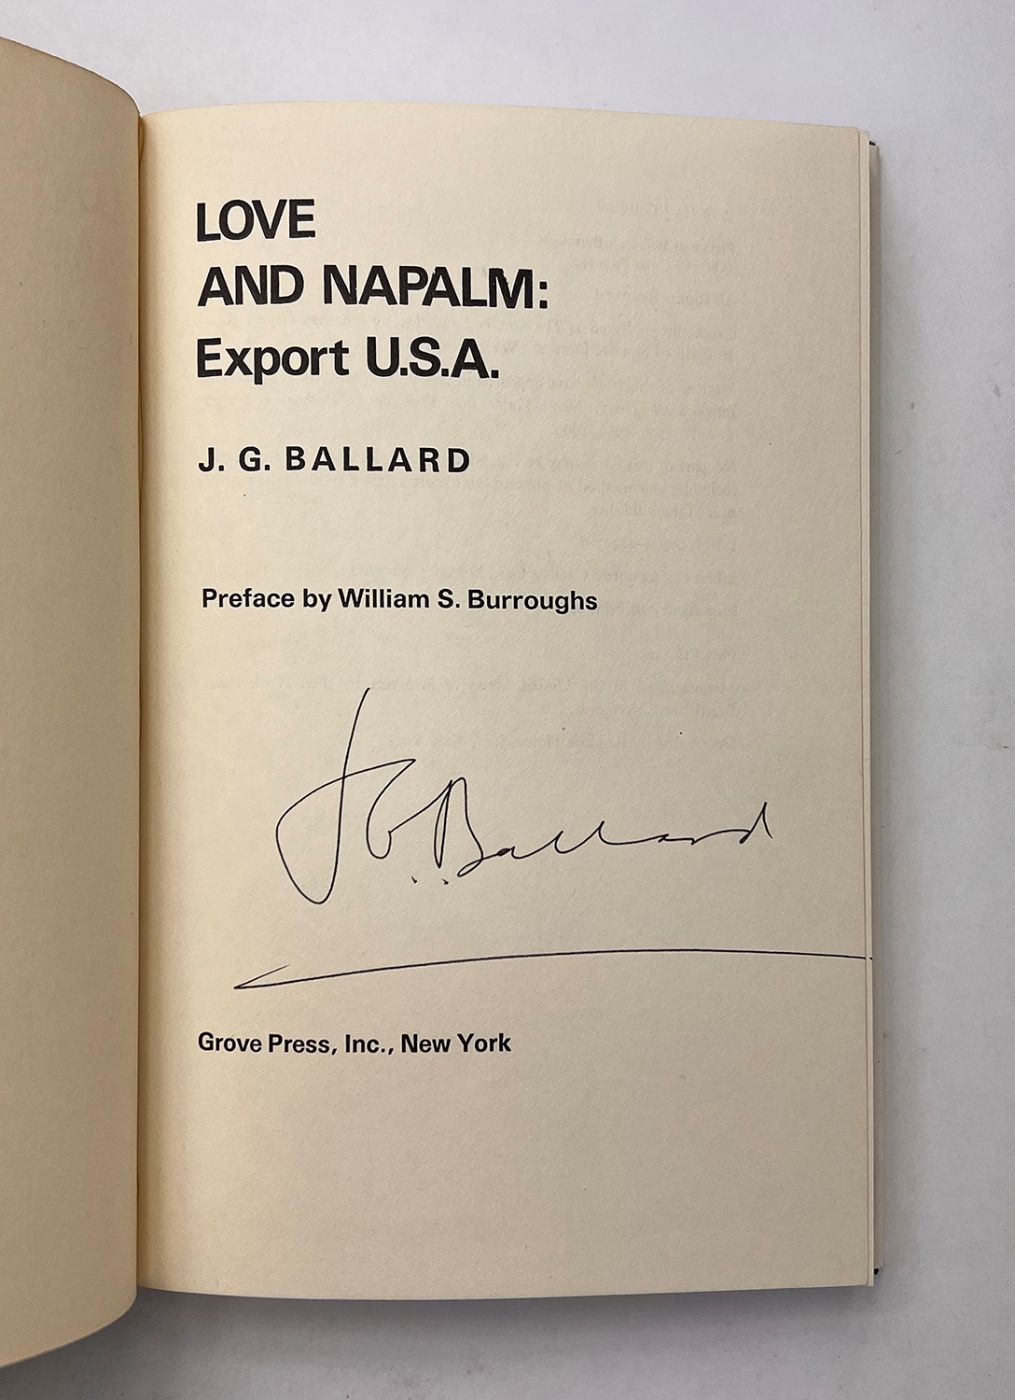 LOVE AND NAPALM: EXPORT U.S.A -  image 4